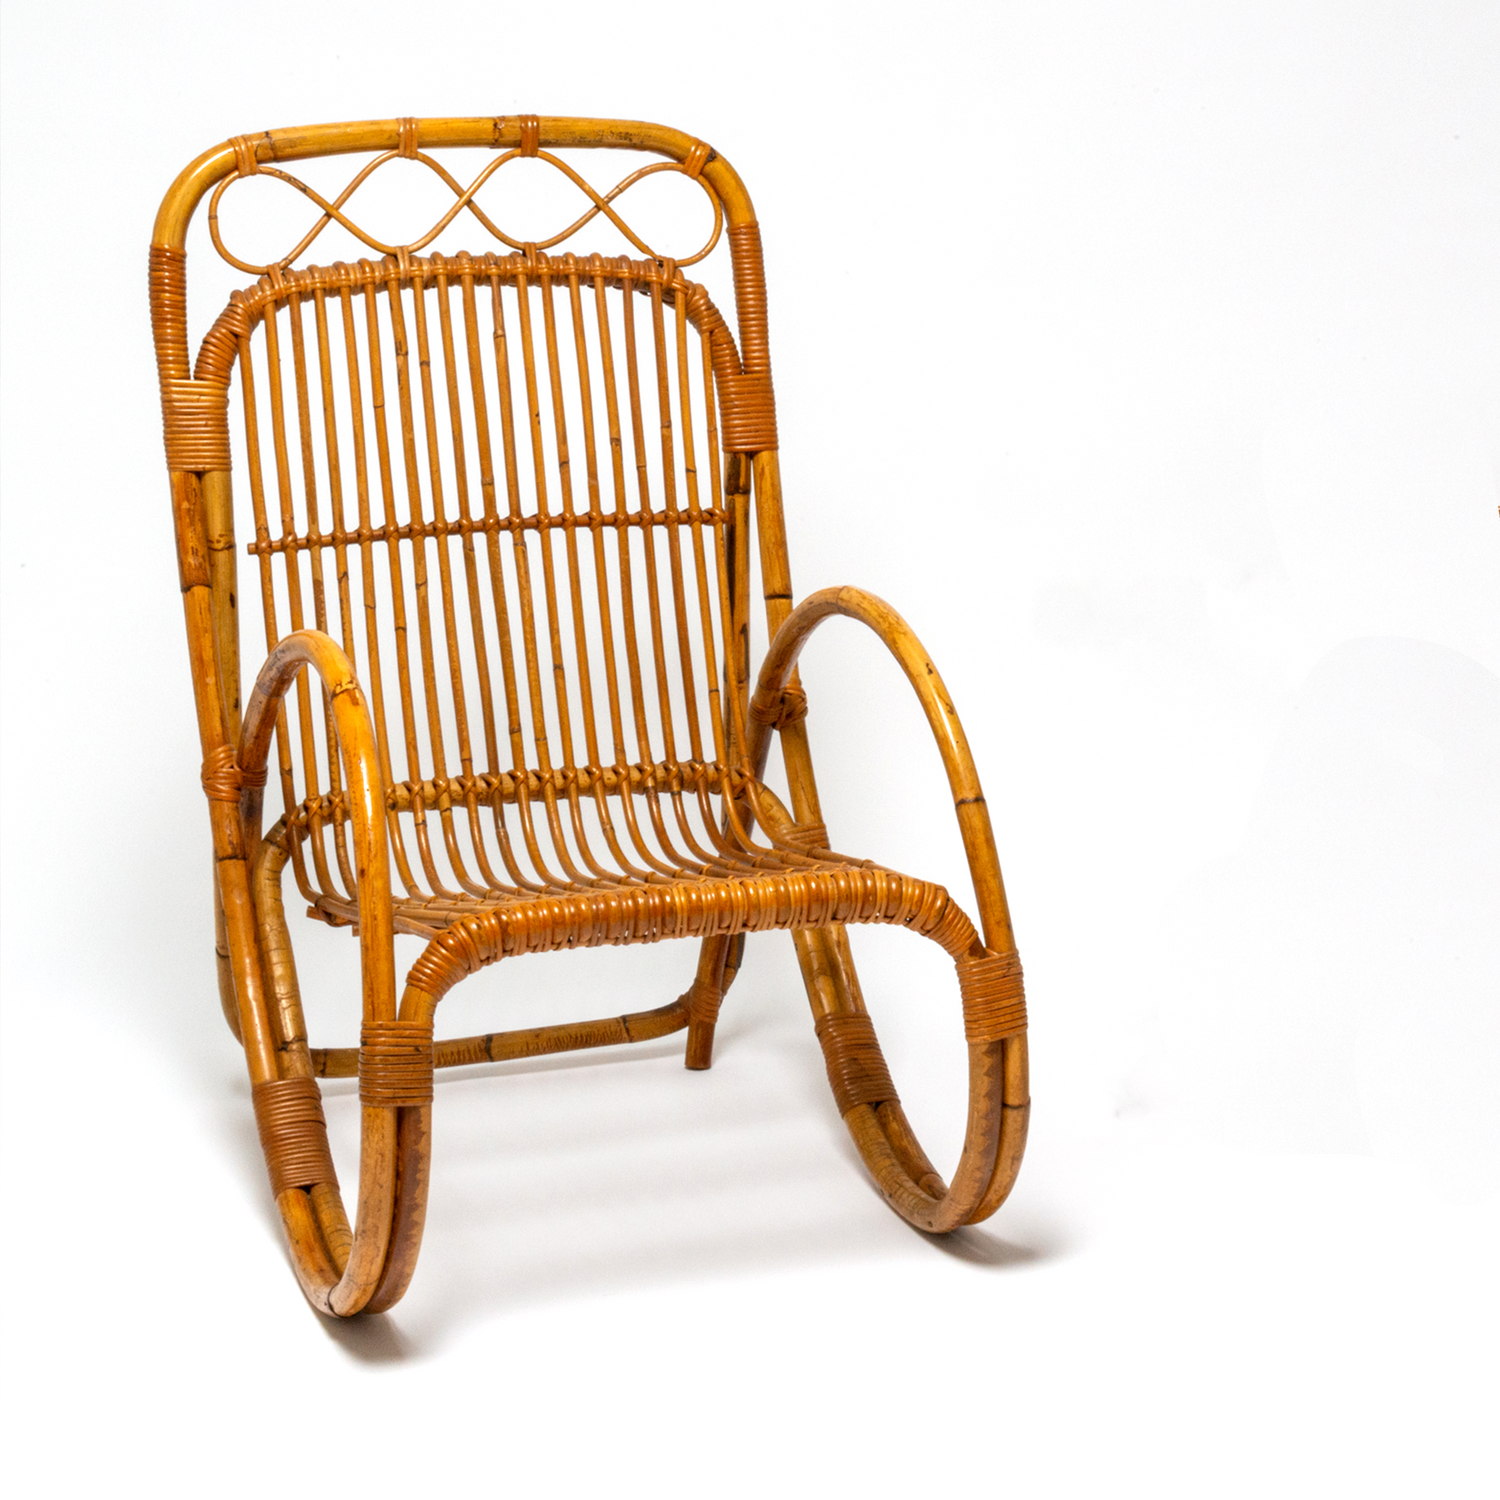 Poeira Vintage Bamboo Chair